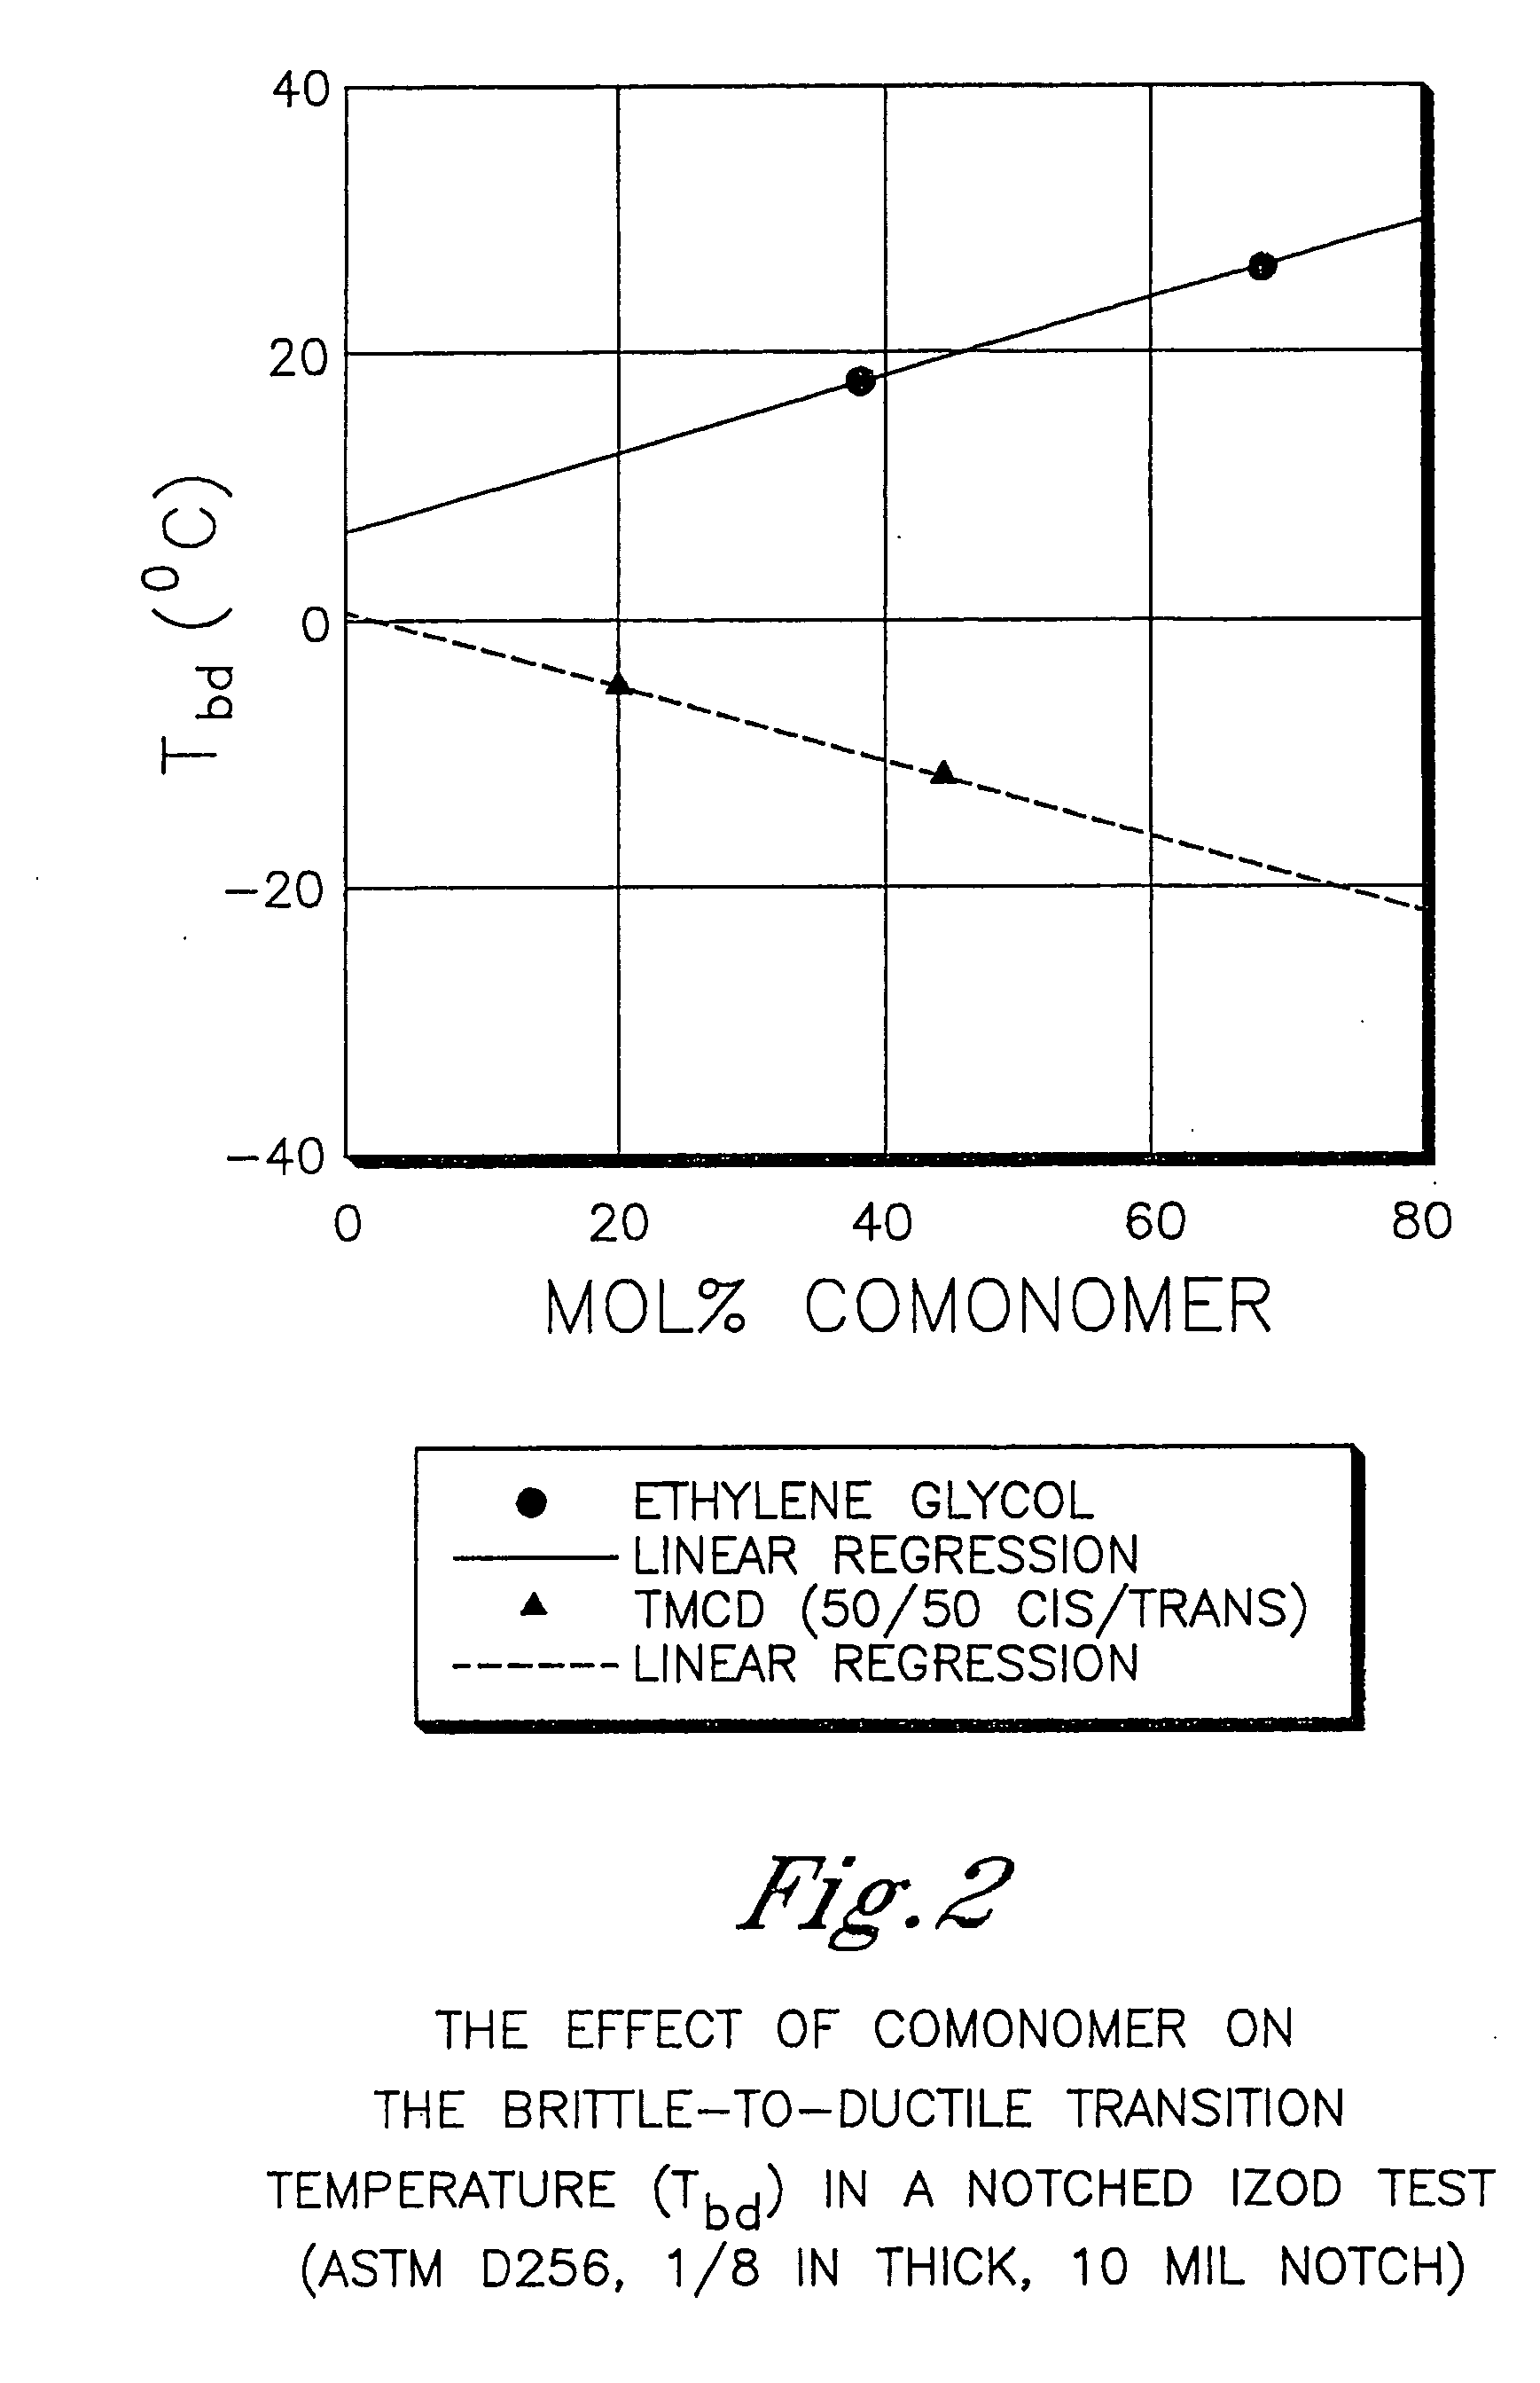 Polyester compositions containing cyclobutanediol having a certain combination of inherent viscosity and moderate glass transition temperature and articles made therefrom